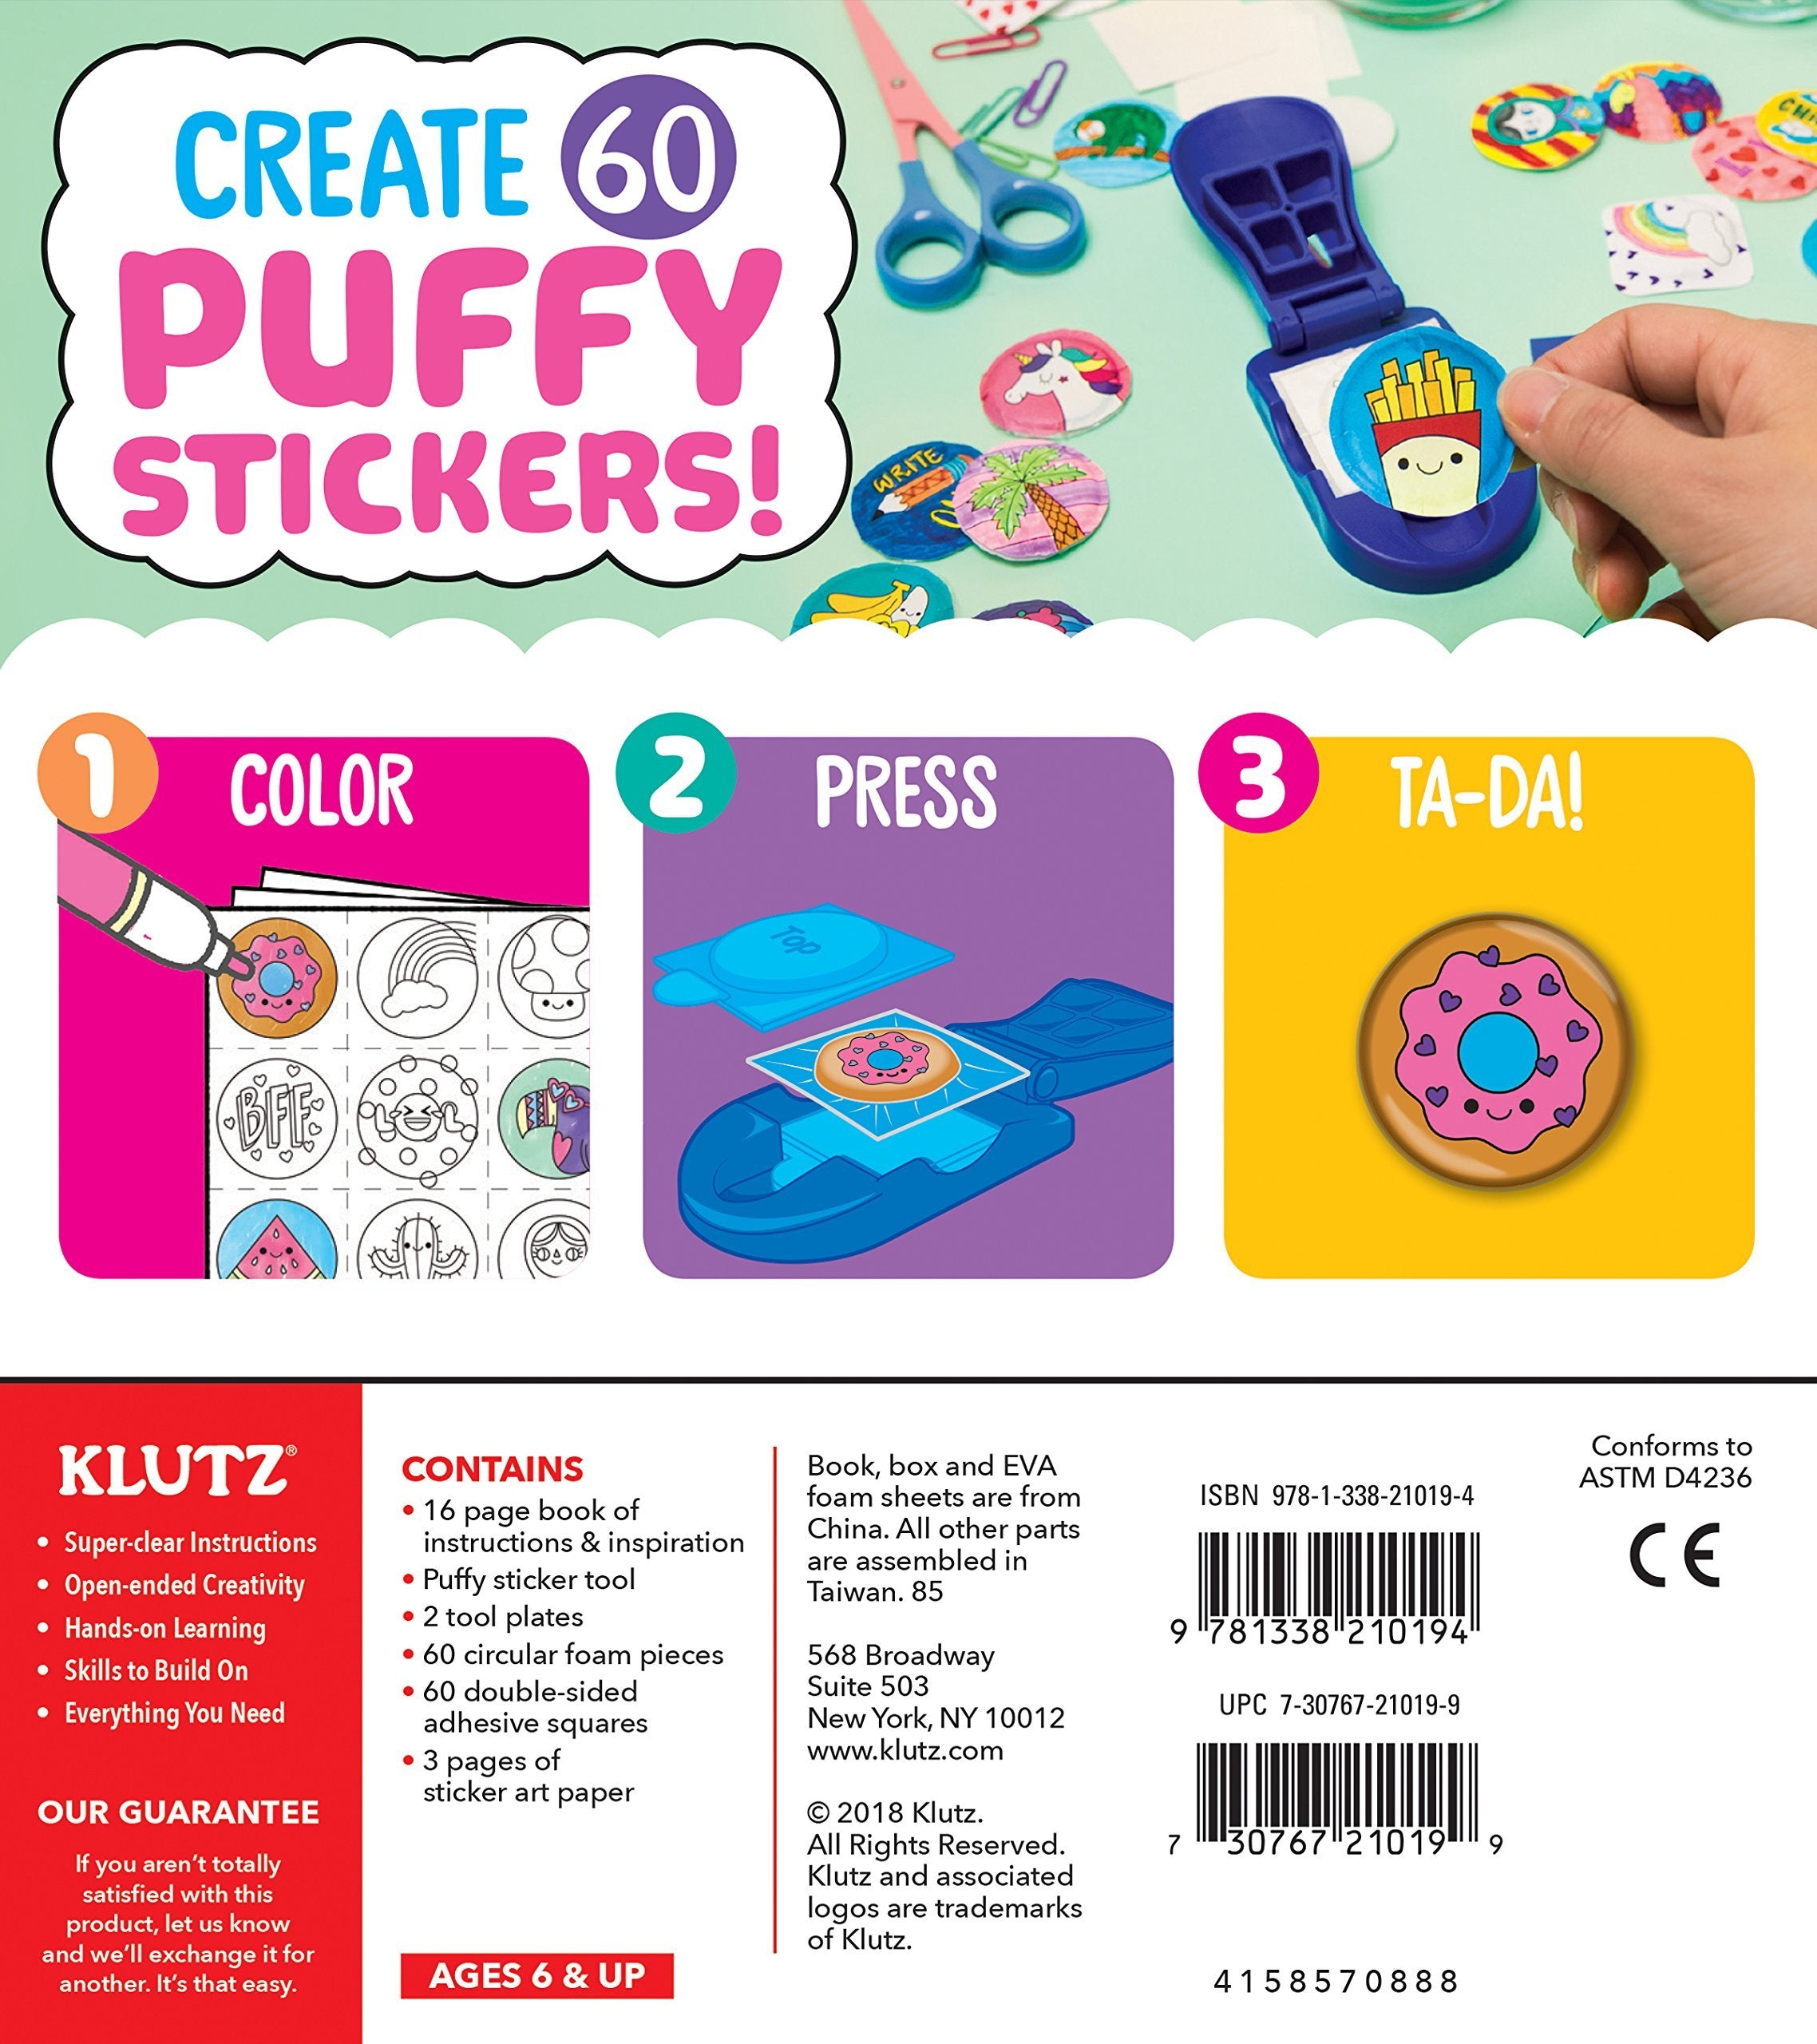 Klutz- Make Your Own Puffy Stickers